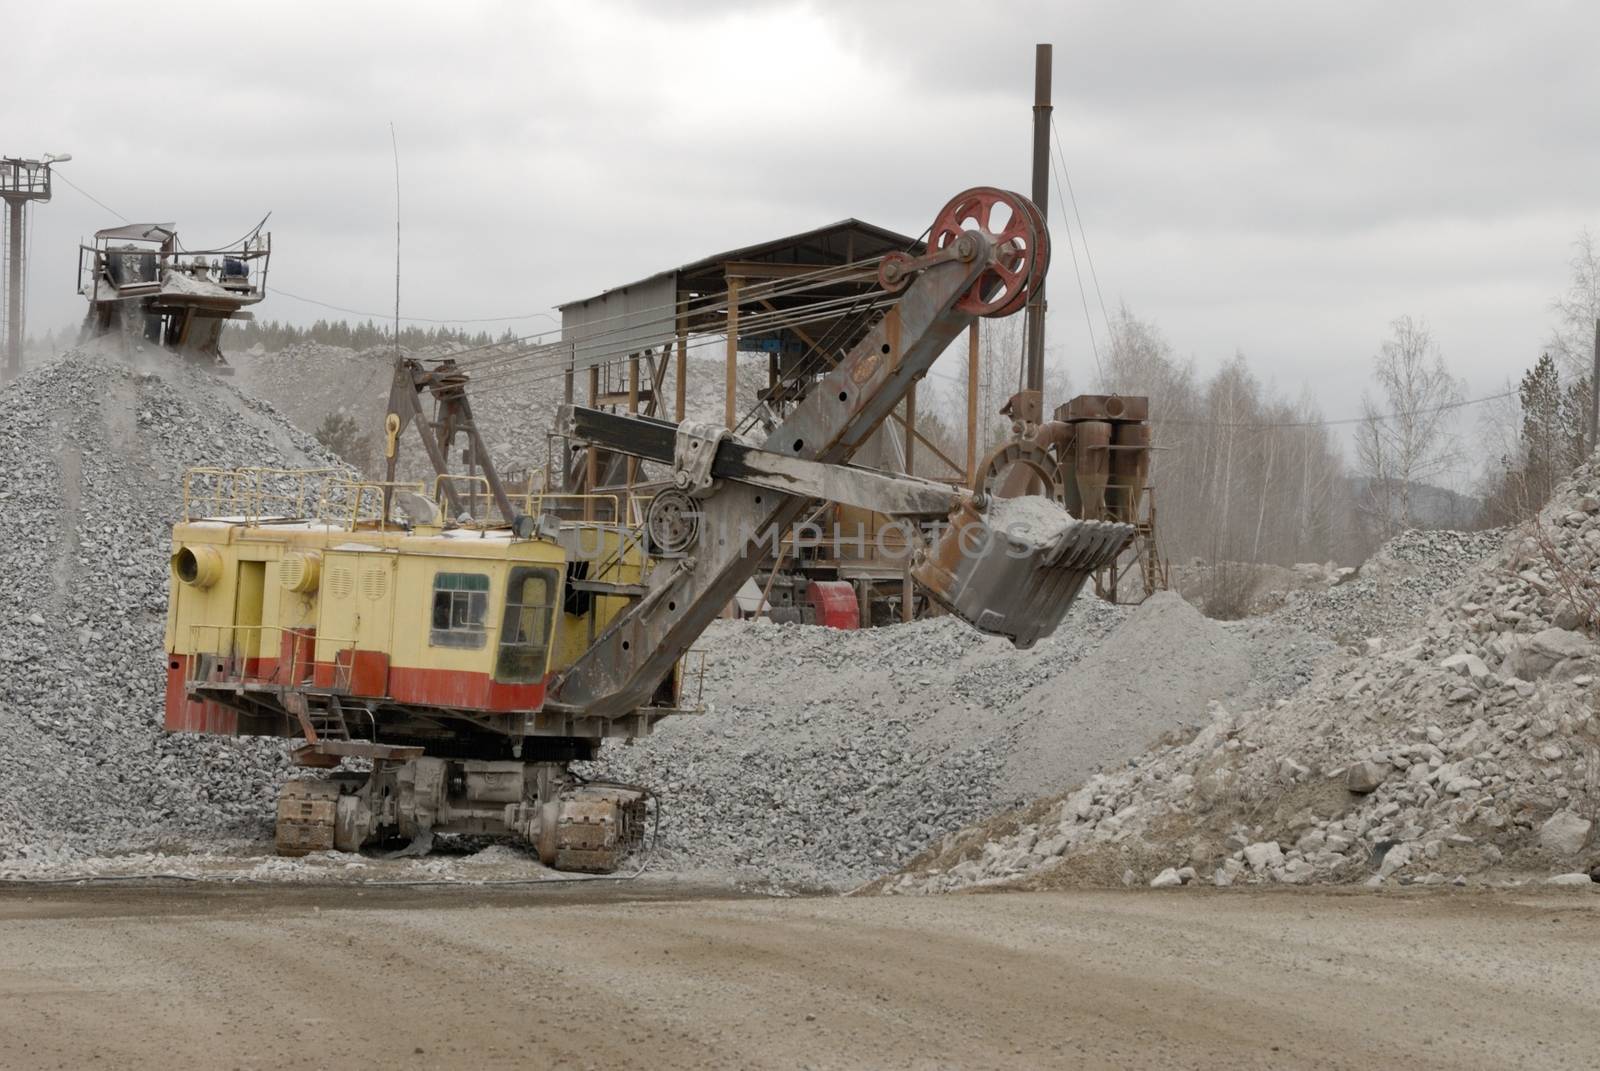 power hydraulic digger working in quarry, caterpillar